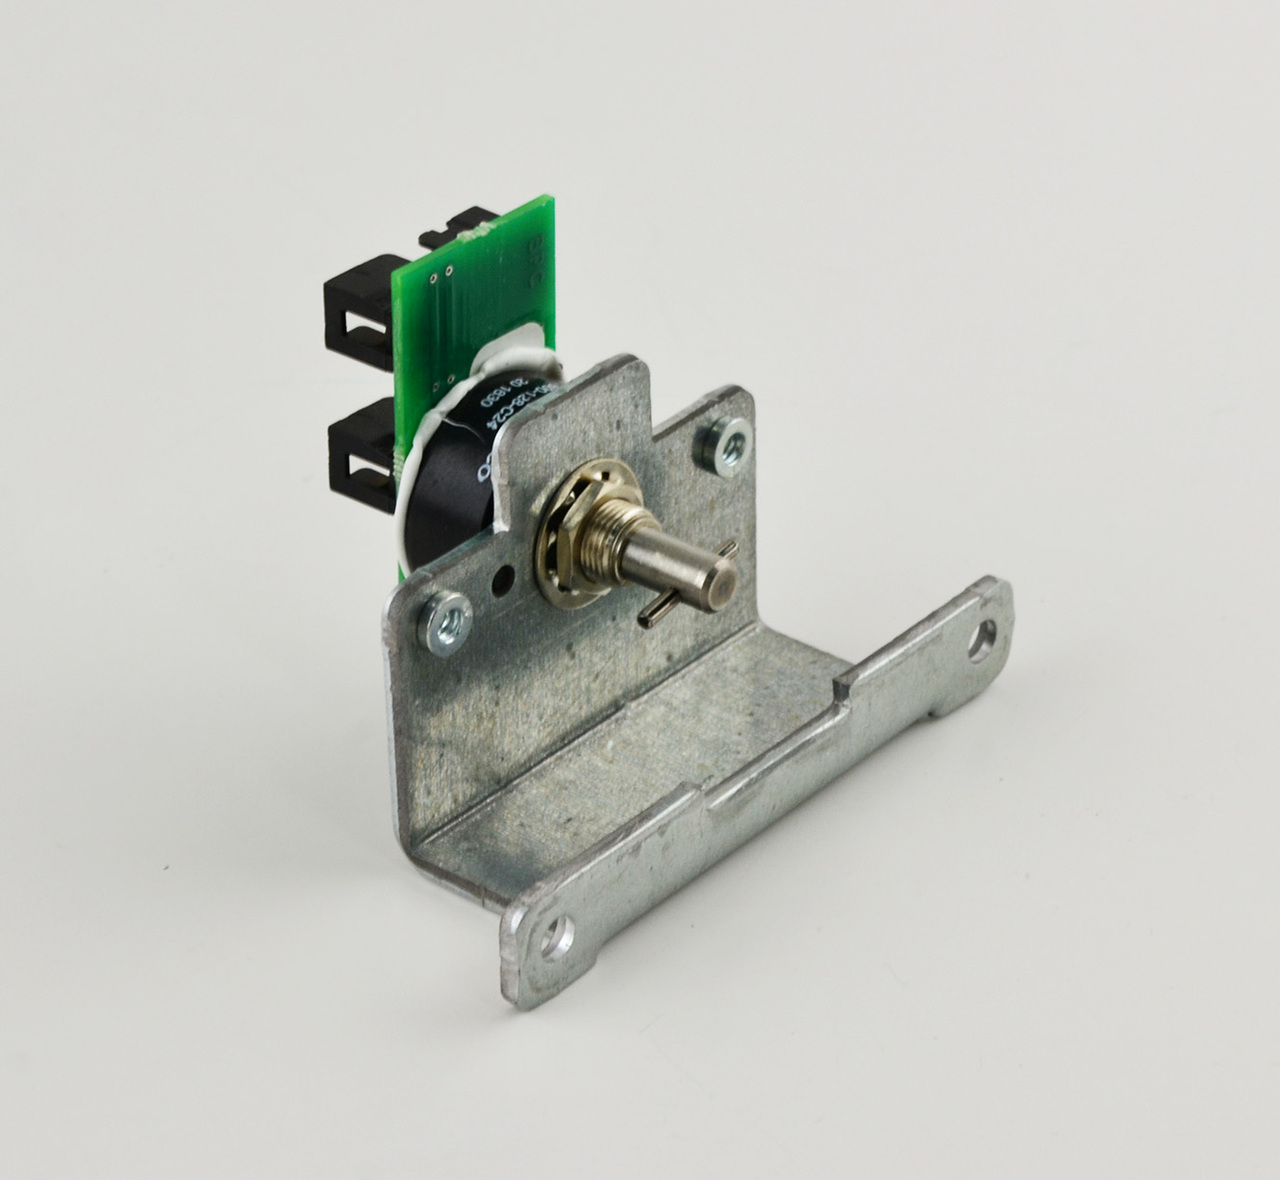 PULSER ASSEMBLY WITH BRACKET (NEW), Fits Bennett Image